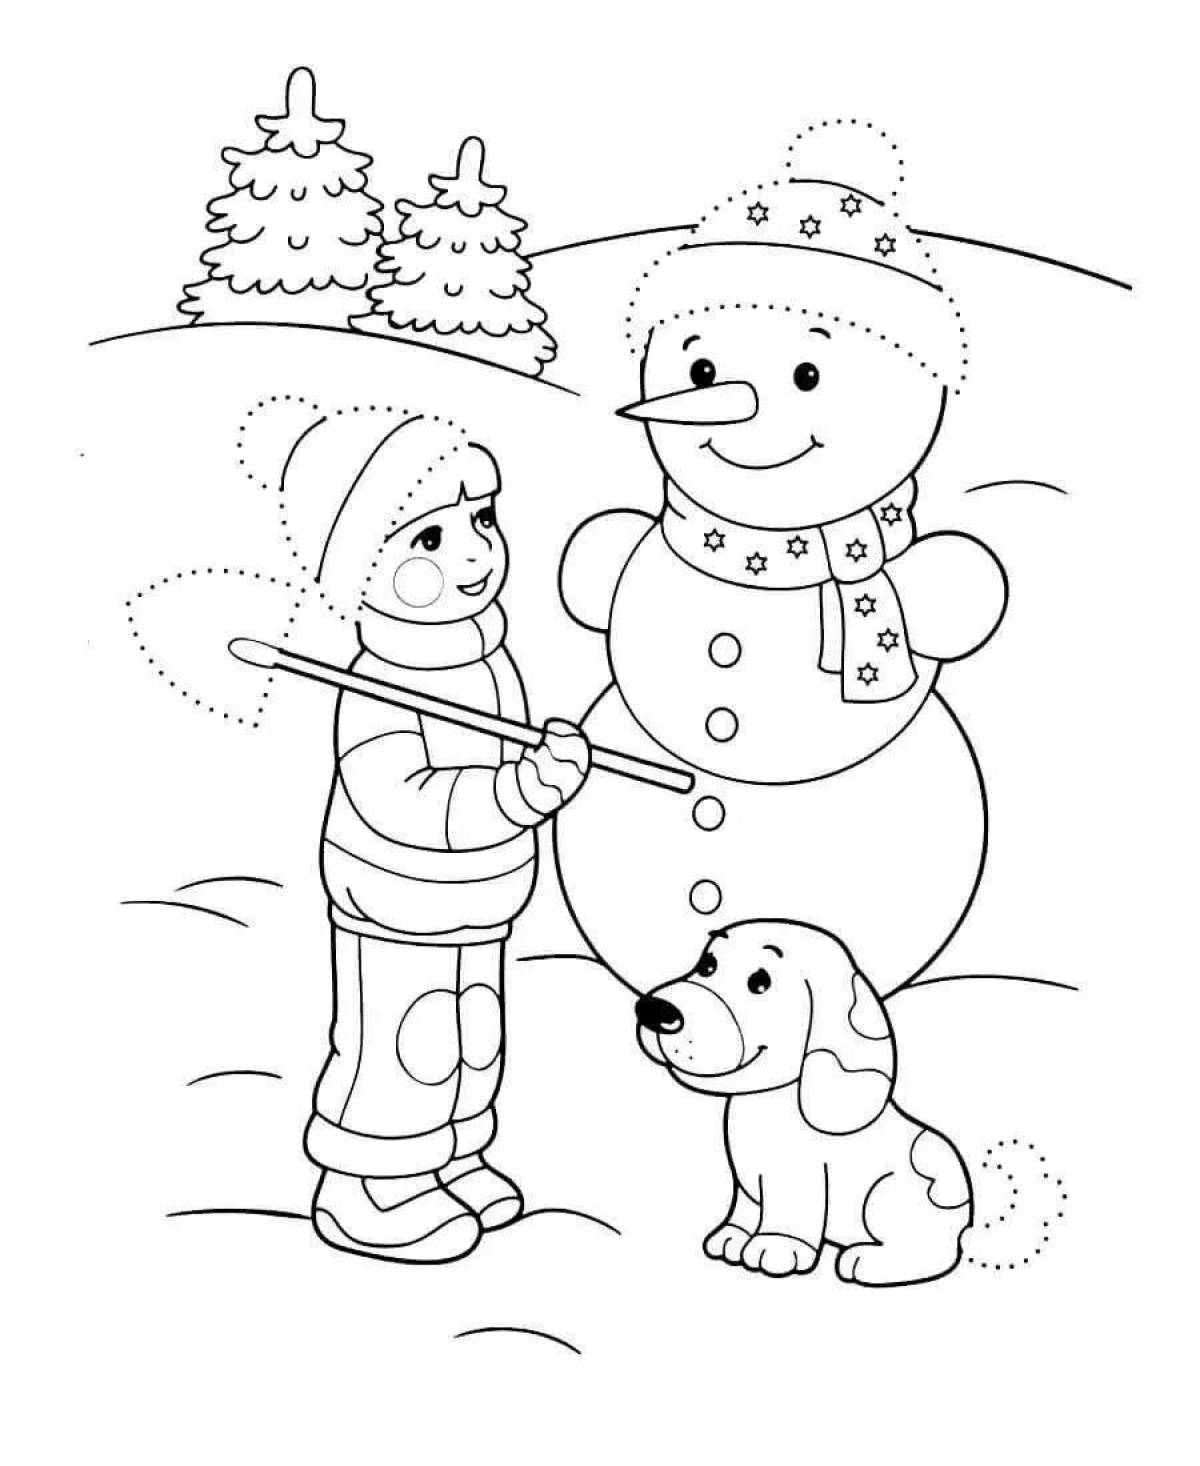 Live winter coloring for children 3 years old